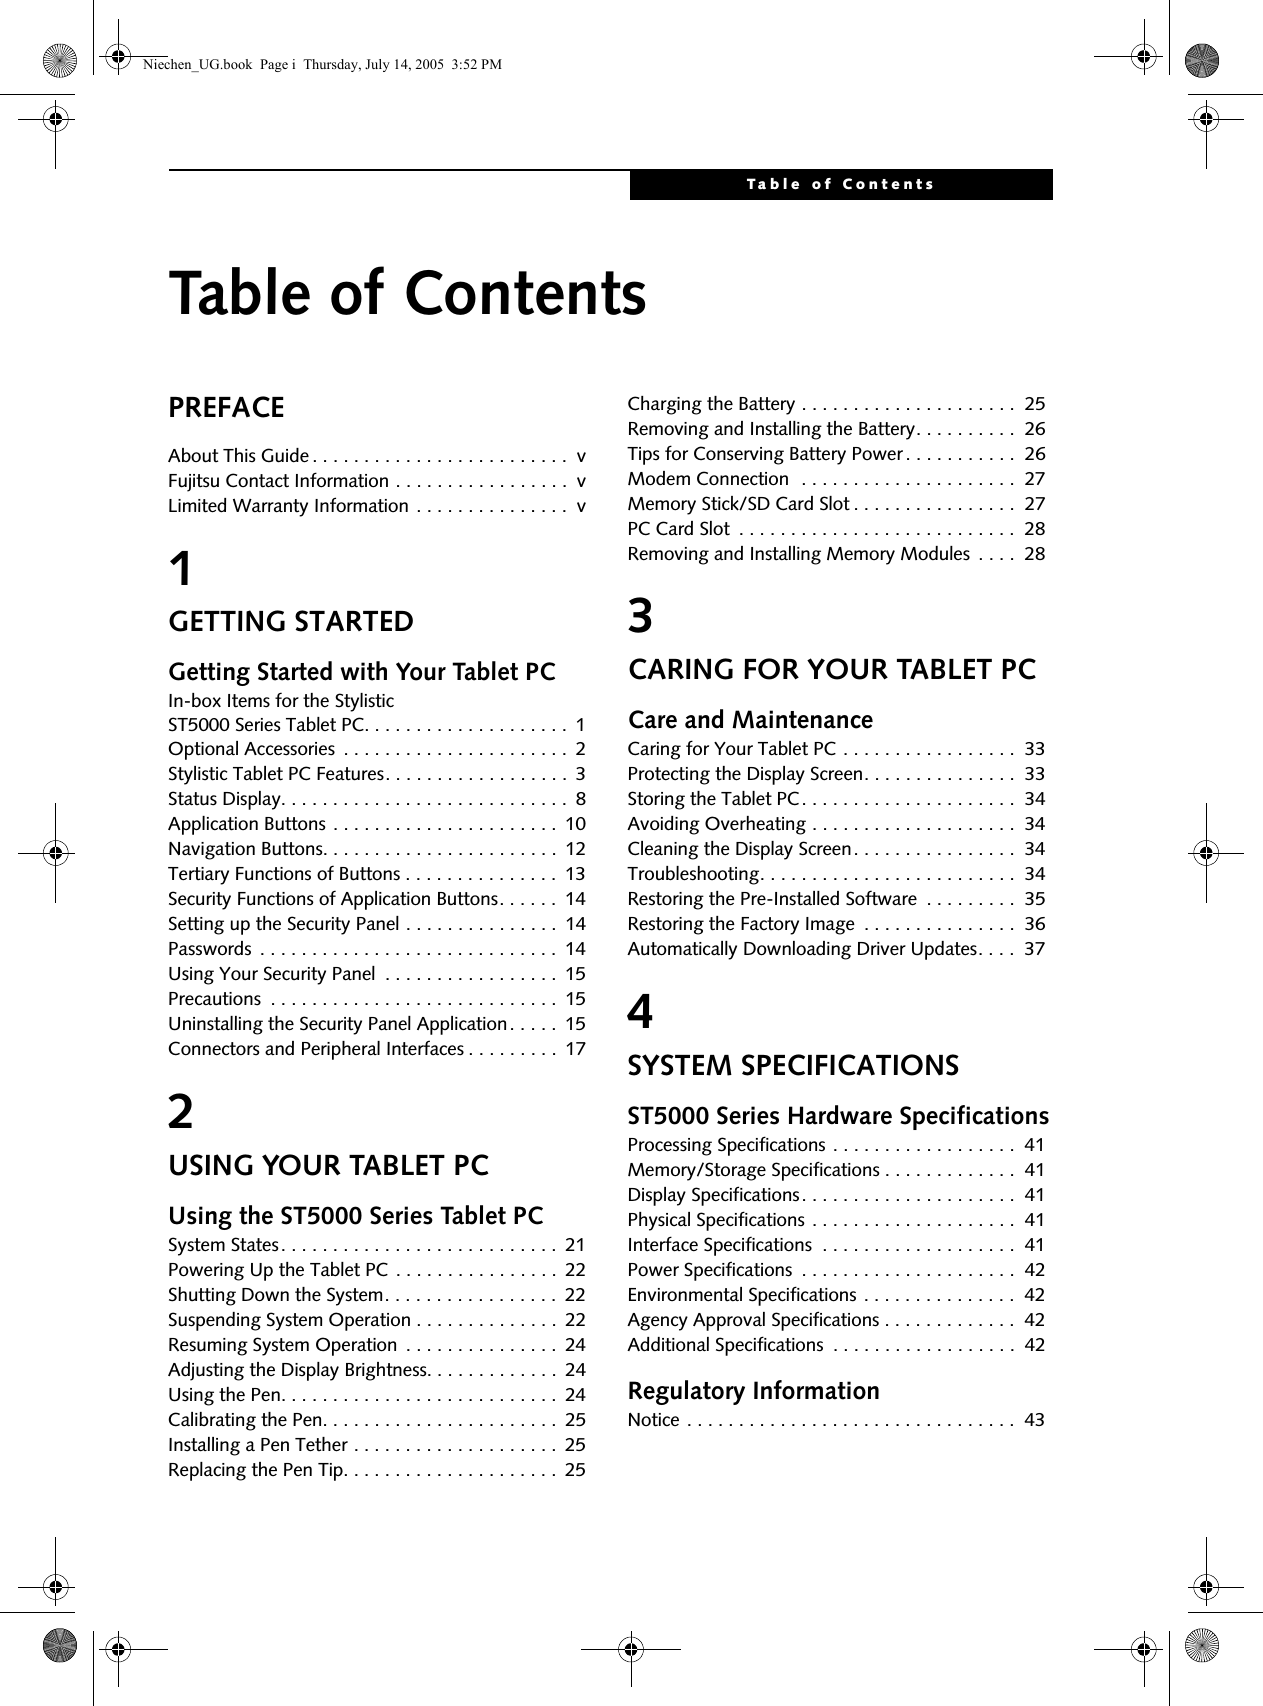 Table of ContentsTable of ContentsPREFACEAbout This Guide . . . . . . . . . . . . . . . . . . . . . . . . .  vFujitsu Contact Information . . . . . . . . . . . . . . . . .  vLimited Warranty Information . . . . . . . . . . . . . . .  v1GETTING STARTEDGetting Started with Your Tablet PCIn-box Items for the Stylistic ST5000 Series Tablet PC. . . . . . . . . . . . . . . . . . . .  1Optional Accessories  . . . . . . . . . . . . . . . . . . . . . .  2Stylistic Tablet PC Features. . . . . . . . . . . . . . . . . .  3Status Display. . . . . . . . . . . . . . . . . . . . . . . . . . . .  8Application Buttons . . . . . . . . . . . . . . . . . . . . . .  10Navigation Buttons. . . . . . . . . . . . . . . . . . . . . . .  12Tertiary Functions of Buttons . . . . . . . . . . . . . . .  13Security Functions of Application Buttons. . . . . .  14Setting up the Security Panel . . . . . . . . . . . . . . .  14Passwords  . . . . . . . . . . . . . . . . . . . . . . . . . . . . .  14Using Your Security Panel  . . . . . . . . . . . . . . . . .  15Precautions  . . . . . . . . . . . . . . . . . . . . . . . . . . . .  15Uninstalling the Security Panel Application . . . . .  15Connectors and Peripheral Interfaces . . . . . . . . .  172USING YOUR TABLET PCUsing the ST5000 Series Tablet PCSystem States. . . . . . . . . . . . . . . . . . . . . . . . . . .  21Powering Up the Tablet PC . . . . . . . . . . . . . . . .  22Shutting Down the System. . . . . . . . . . . . . . . . .  22Suspending System Operation . . . . . . . . . . . . . .  22Resuming System Operation  . . . . . . . . . . . . . . .  24Adjusting the Display Brightness. . . . . . . . . . . . .  24Using the Pen. . . . . . . . . . . . . . . . . . . . . . . . . . .  24Calibrating the Pen. . . . . . . . . . . . . . . . . . . . . . .  25Installing a Pen Tether . . . . . . . . . . . . . . . . . . . .  25Replacing the Pen Tip. . . . . . . . . . . . . . . . . . . . .  25Charging the Battery . . . . . . . . . . . . . . . . . . . . .  25Removing and Installing the Battery. . . . . . . . . .  26Tips for Conserving Battery Power . . . . . . . . . . .  26Modem Connection  . . . . . . . . . . . . . . . . . . . . .  27Memory Stick/SD Card Slot . . . . . . . . . . . . . . . .  27PC Card Slot  . . . . . . . . . . . . . . . . . . . . . . . . . . .  28Removing and Installing Memory Modules  . . . .  283CARING FOR YOUR TABLET PCCare and MaintenanceCaring for Your Tablet PC . . . . . . . . . . . . . . . . .  33Protecting the Display Screen. . . . . . . . . . . . . . .  33Storing the Tablet PC. . . . . . . . . . . . . . . . . . . . .  34Avoiding Overheating . . . . . . . . . . . . . . . . . . . .  34Cleaning the Display Screen. . . . . . . . . . . . . . . .  34Troubleshooting. . . . . . . . . . . . . . . . . . . . . . . . .  34Restoring the Pre-Installed Software  . . . . . . . . .  35Restoring the Factory Image  . . . . . . . . . . . . . . .  36Automatically Downloading Driver Updates. . . .  374SYSTEM SPECIFICATIONSST5000 Series Hardware SpecificationsProcessing Specifications . . . . . . . . . . . . . . . . . .  41Memory/Storage Specifications . . . . . . . . . . . . .  41Display Specifications. . . . . . . . . . . . . . . . . . . . .  41Physical Specifications . . . . . . . . . . . . . . . . . . . .  41Interface Specifications  . . . . . . . . . . . . . . . . . . .  41Power Specifications  . . . . . . . . . . . . . . . . . . . . .  42Environmental Specifications . . . . . . . . . . . . . . .  42Agency Approval Specifications . . . . . . . . . . . . .  42Additional Specifications  . . . . . . . . . . . . . . . . . .  42Regulatory InformationNotice . . . . . . . . . . . . . . . . . . . . . . . . . . . . . . . .  43Niechen_UG.book  Page i  Thursday, July 14, 2005  3:52 PM